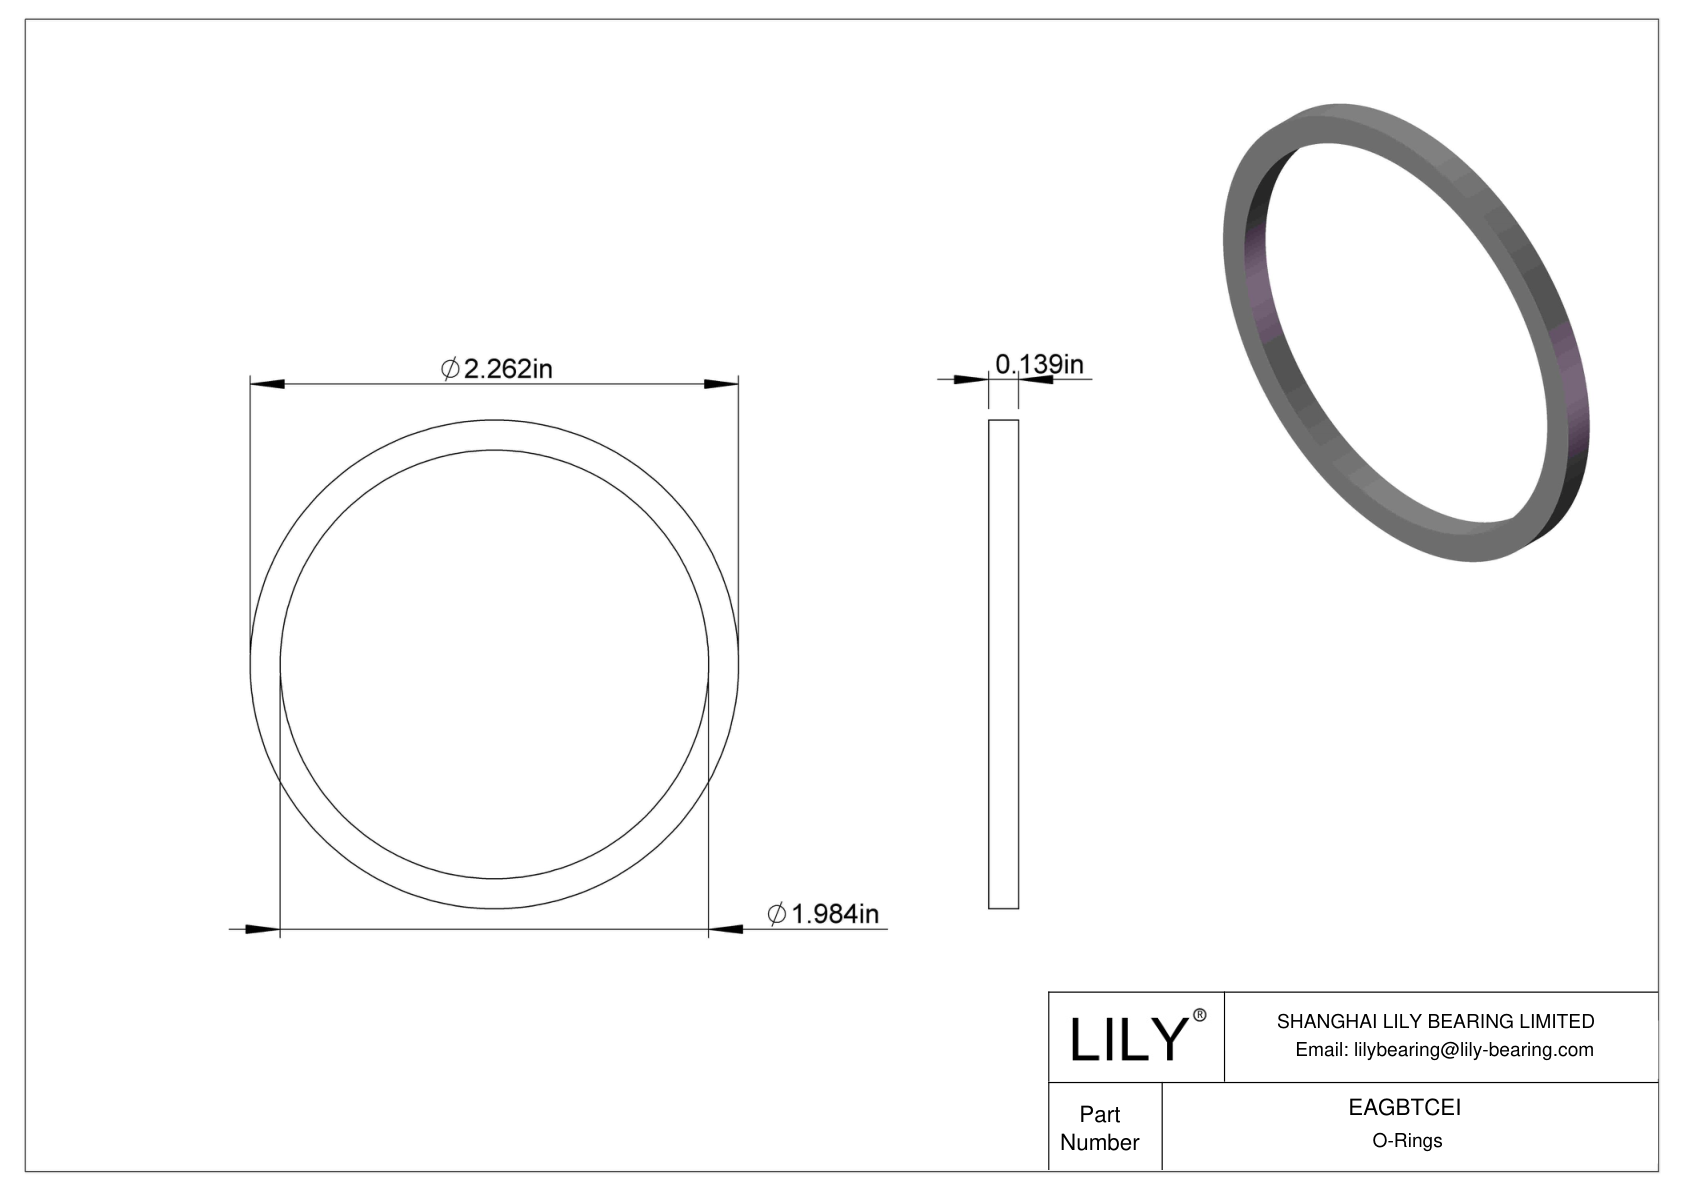 EAGBTCEI Oil Resistant O-Rings Square cad drawing